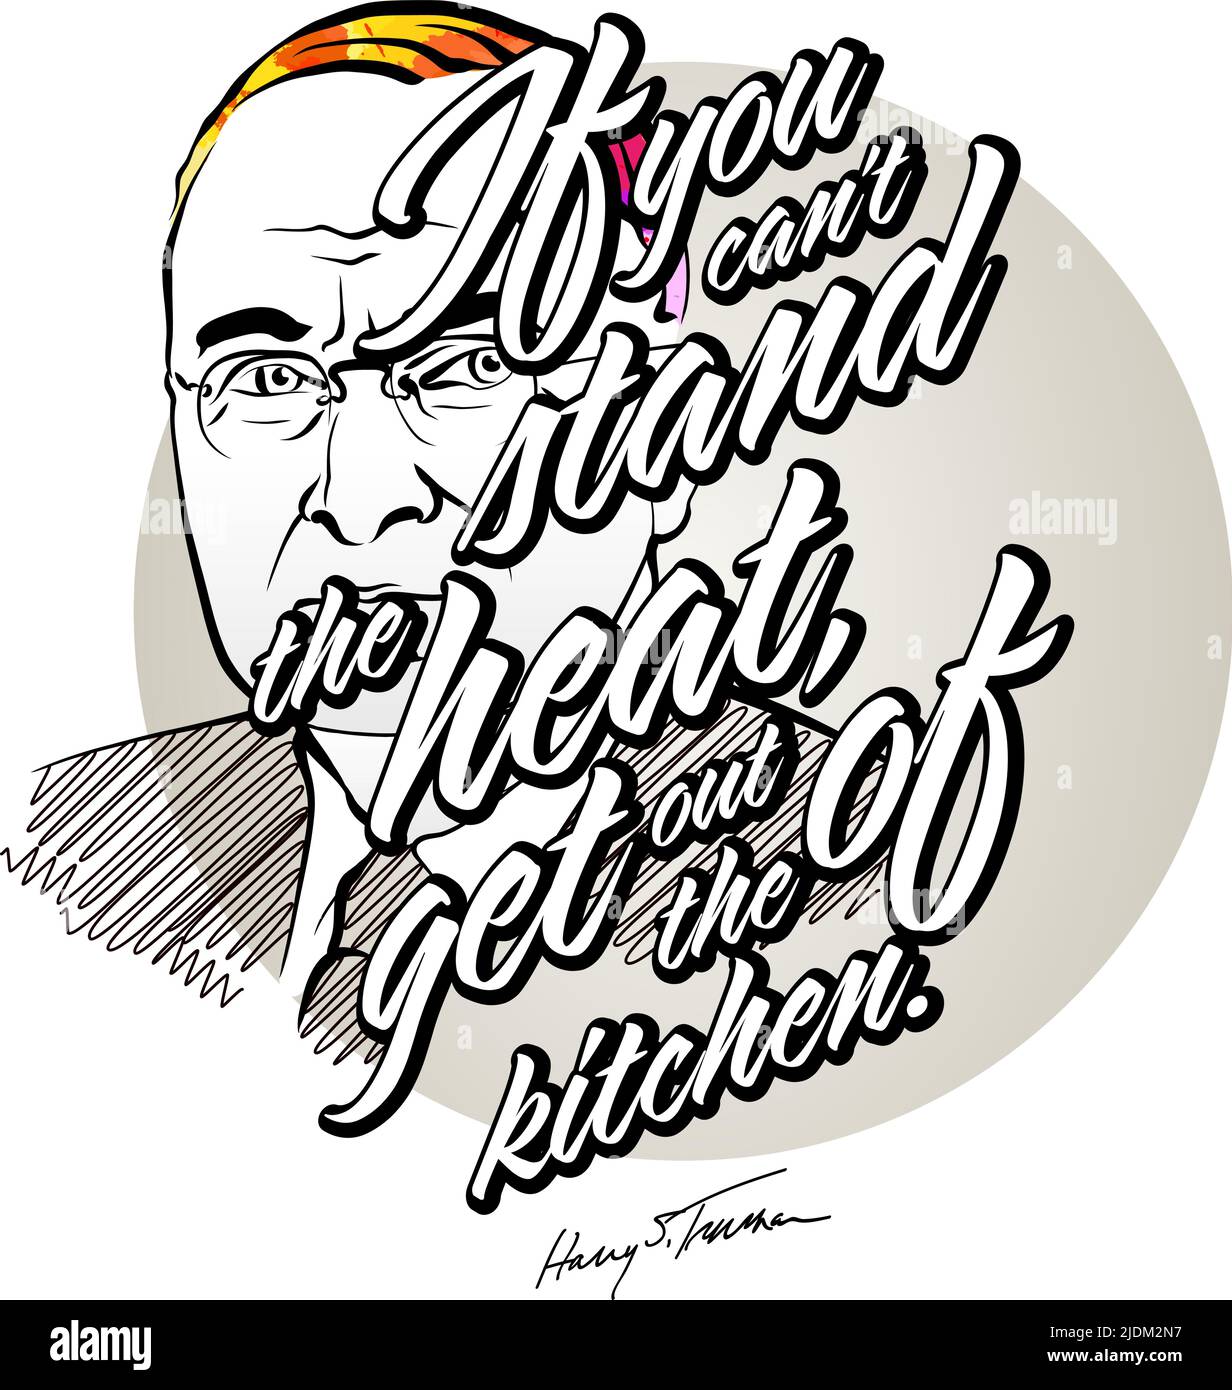 Harry S. Truman sayings with Portrait. Vector art template for print design such as t-shirts or posters. Stock Vector